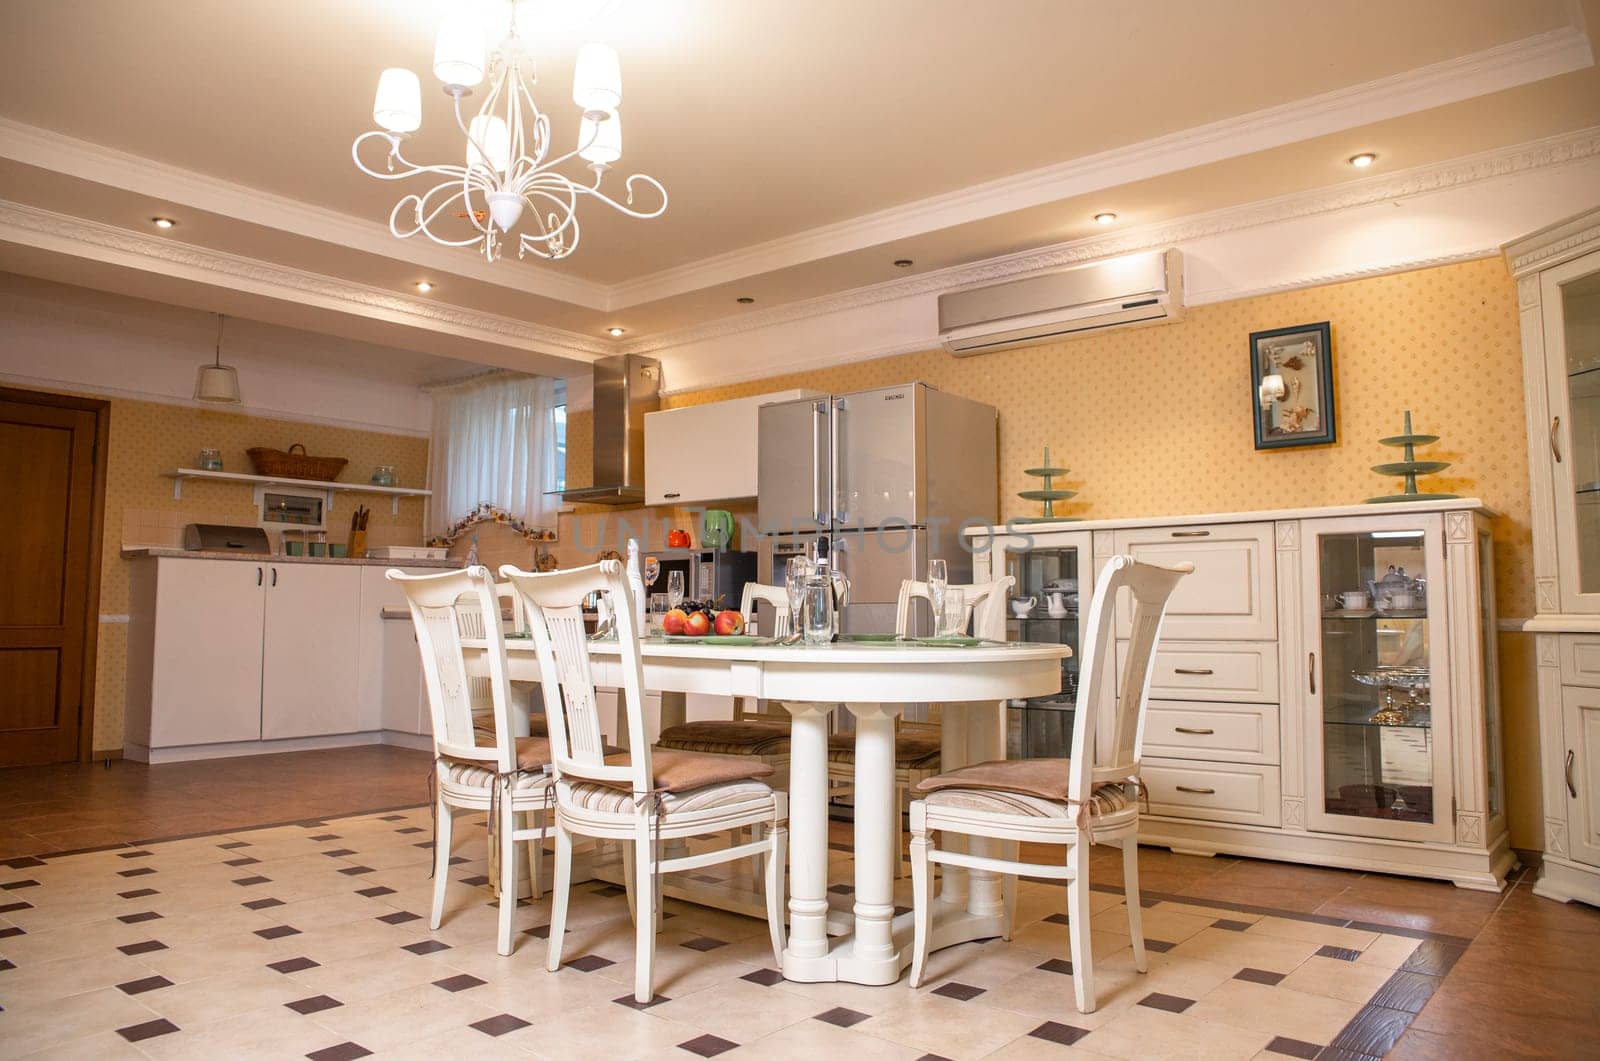 bright kitchen with a dining area. stylish table and chairs in the room.